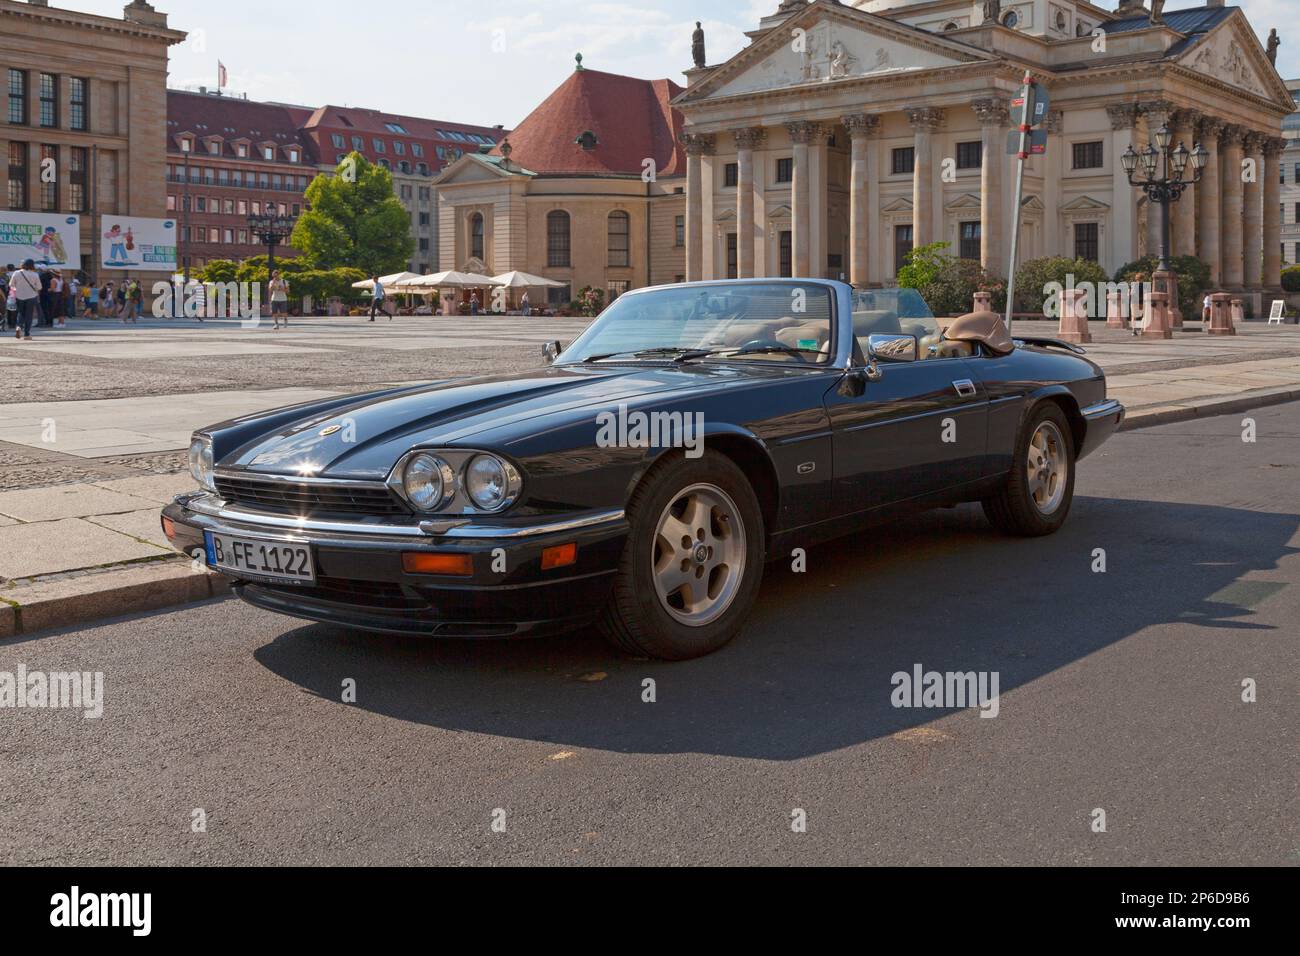 Berlin, Germany - June 03 2019: The Jaguar XJ-S (later called XJS) is a luxury grand tourer manufactured and marketed by British automobile manufactur Stock Photo